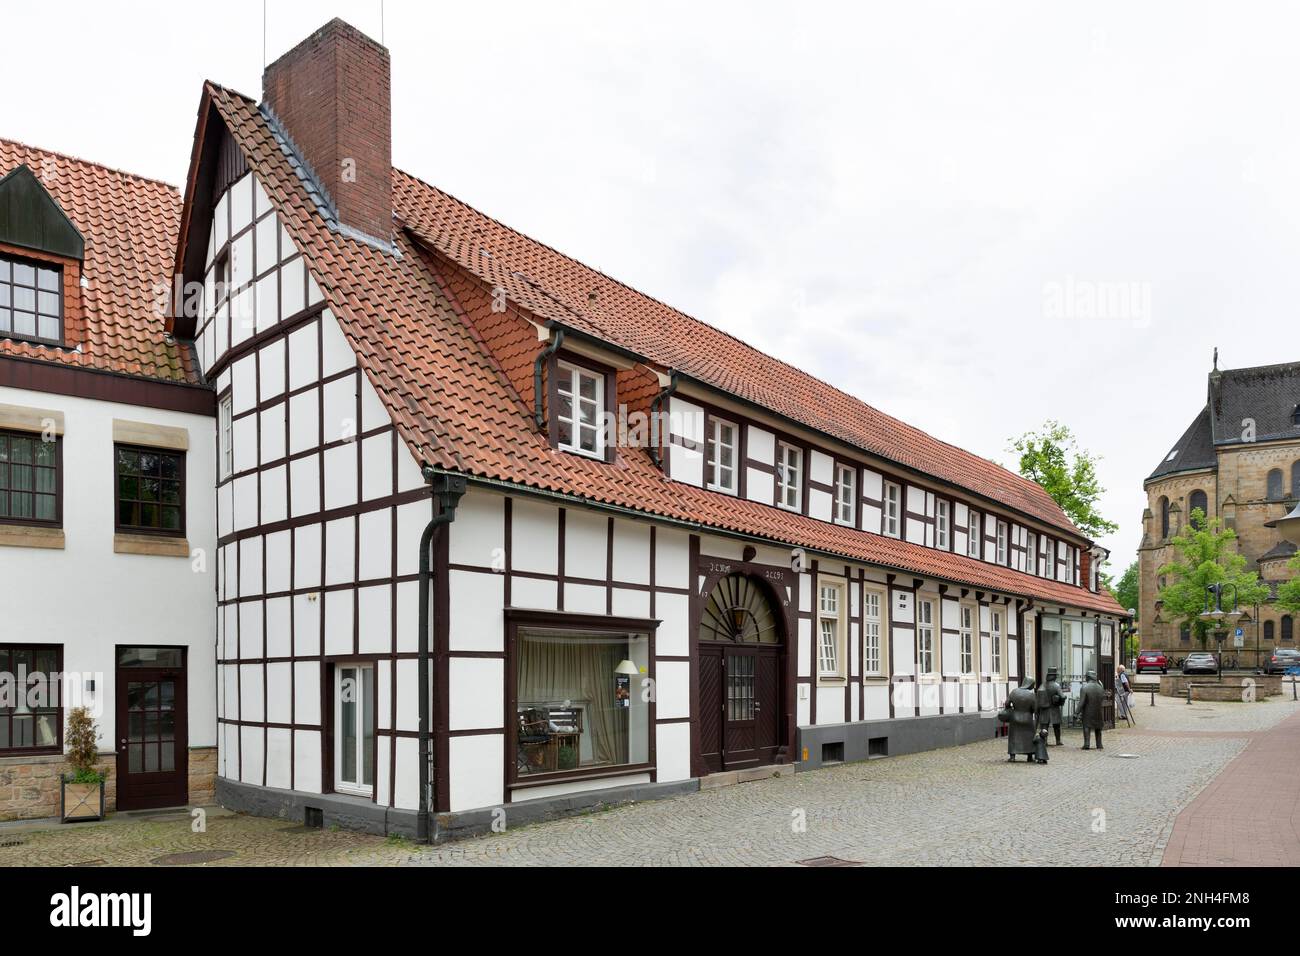 Tueoettenmuseum Mettingen, housed in the former Telsemeyer inn and hotel. The museum displays exhibits on the history of the Toedden trade (also Stock Photo